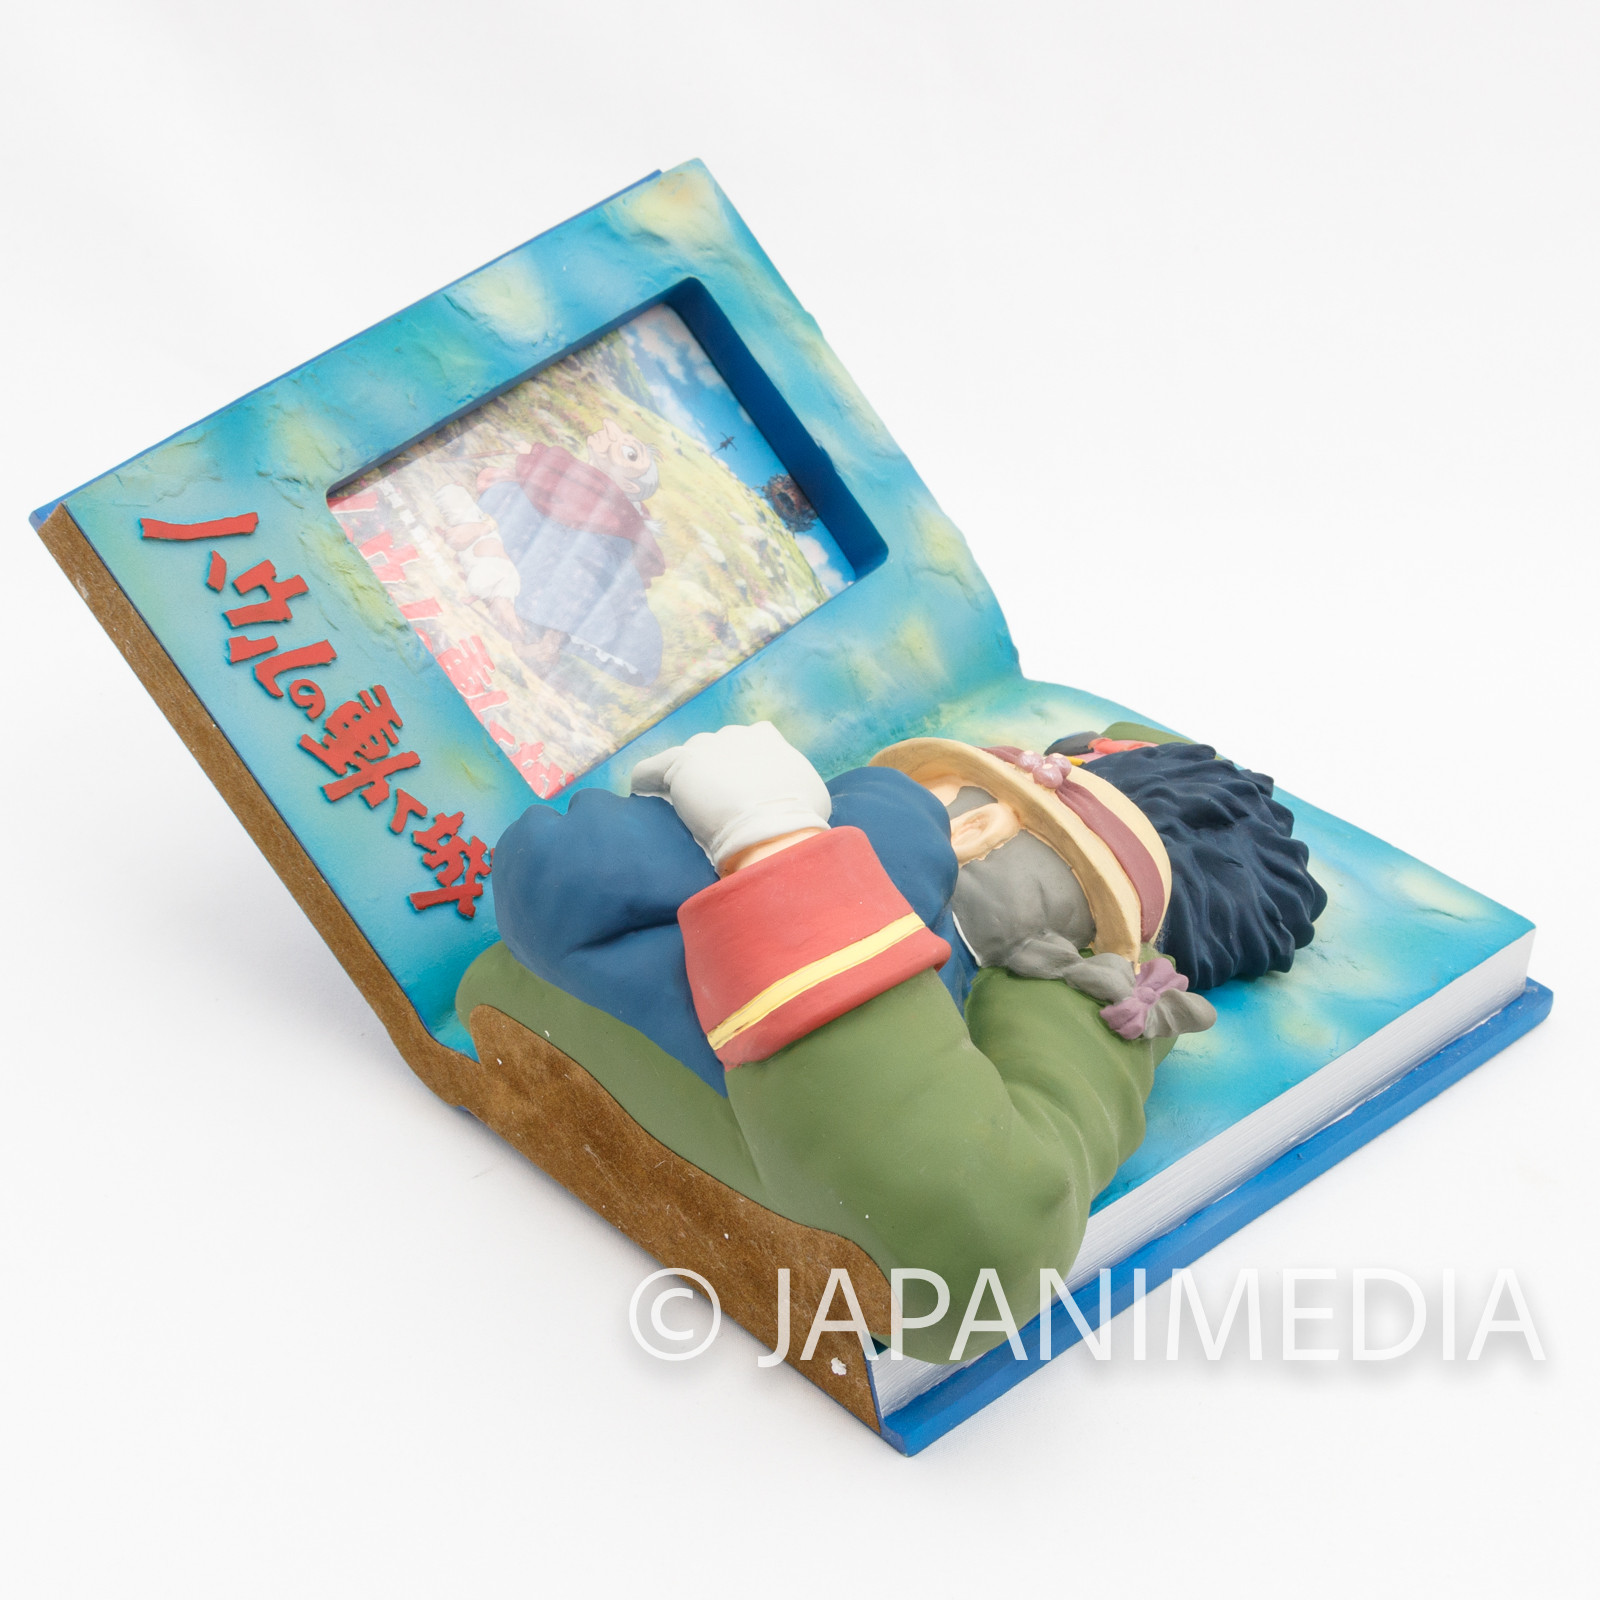 RARE! Howl's Moving Castle Diorama Figure Photo Picture Frame Ghibli JAPAN